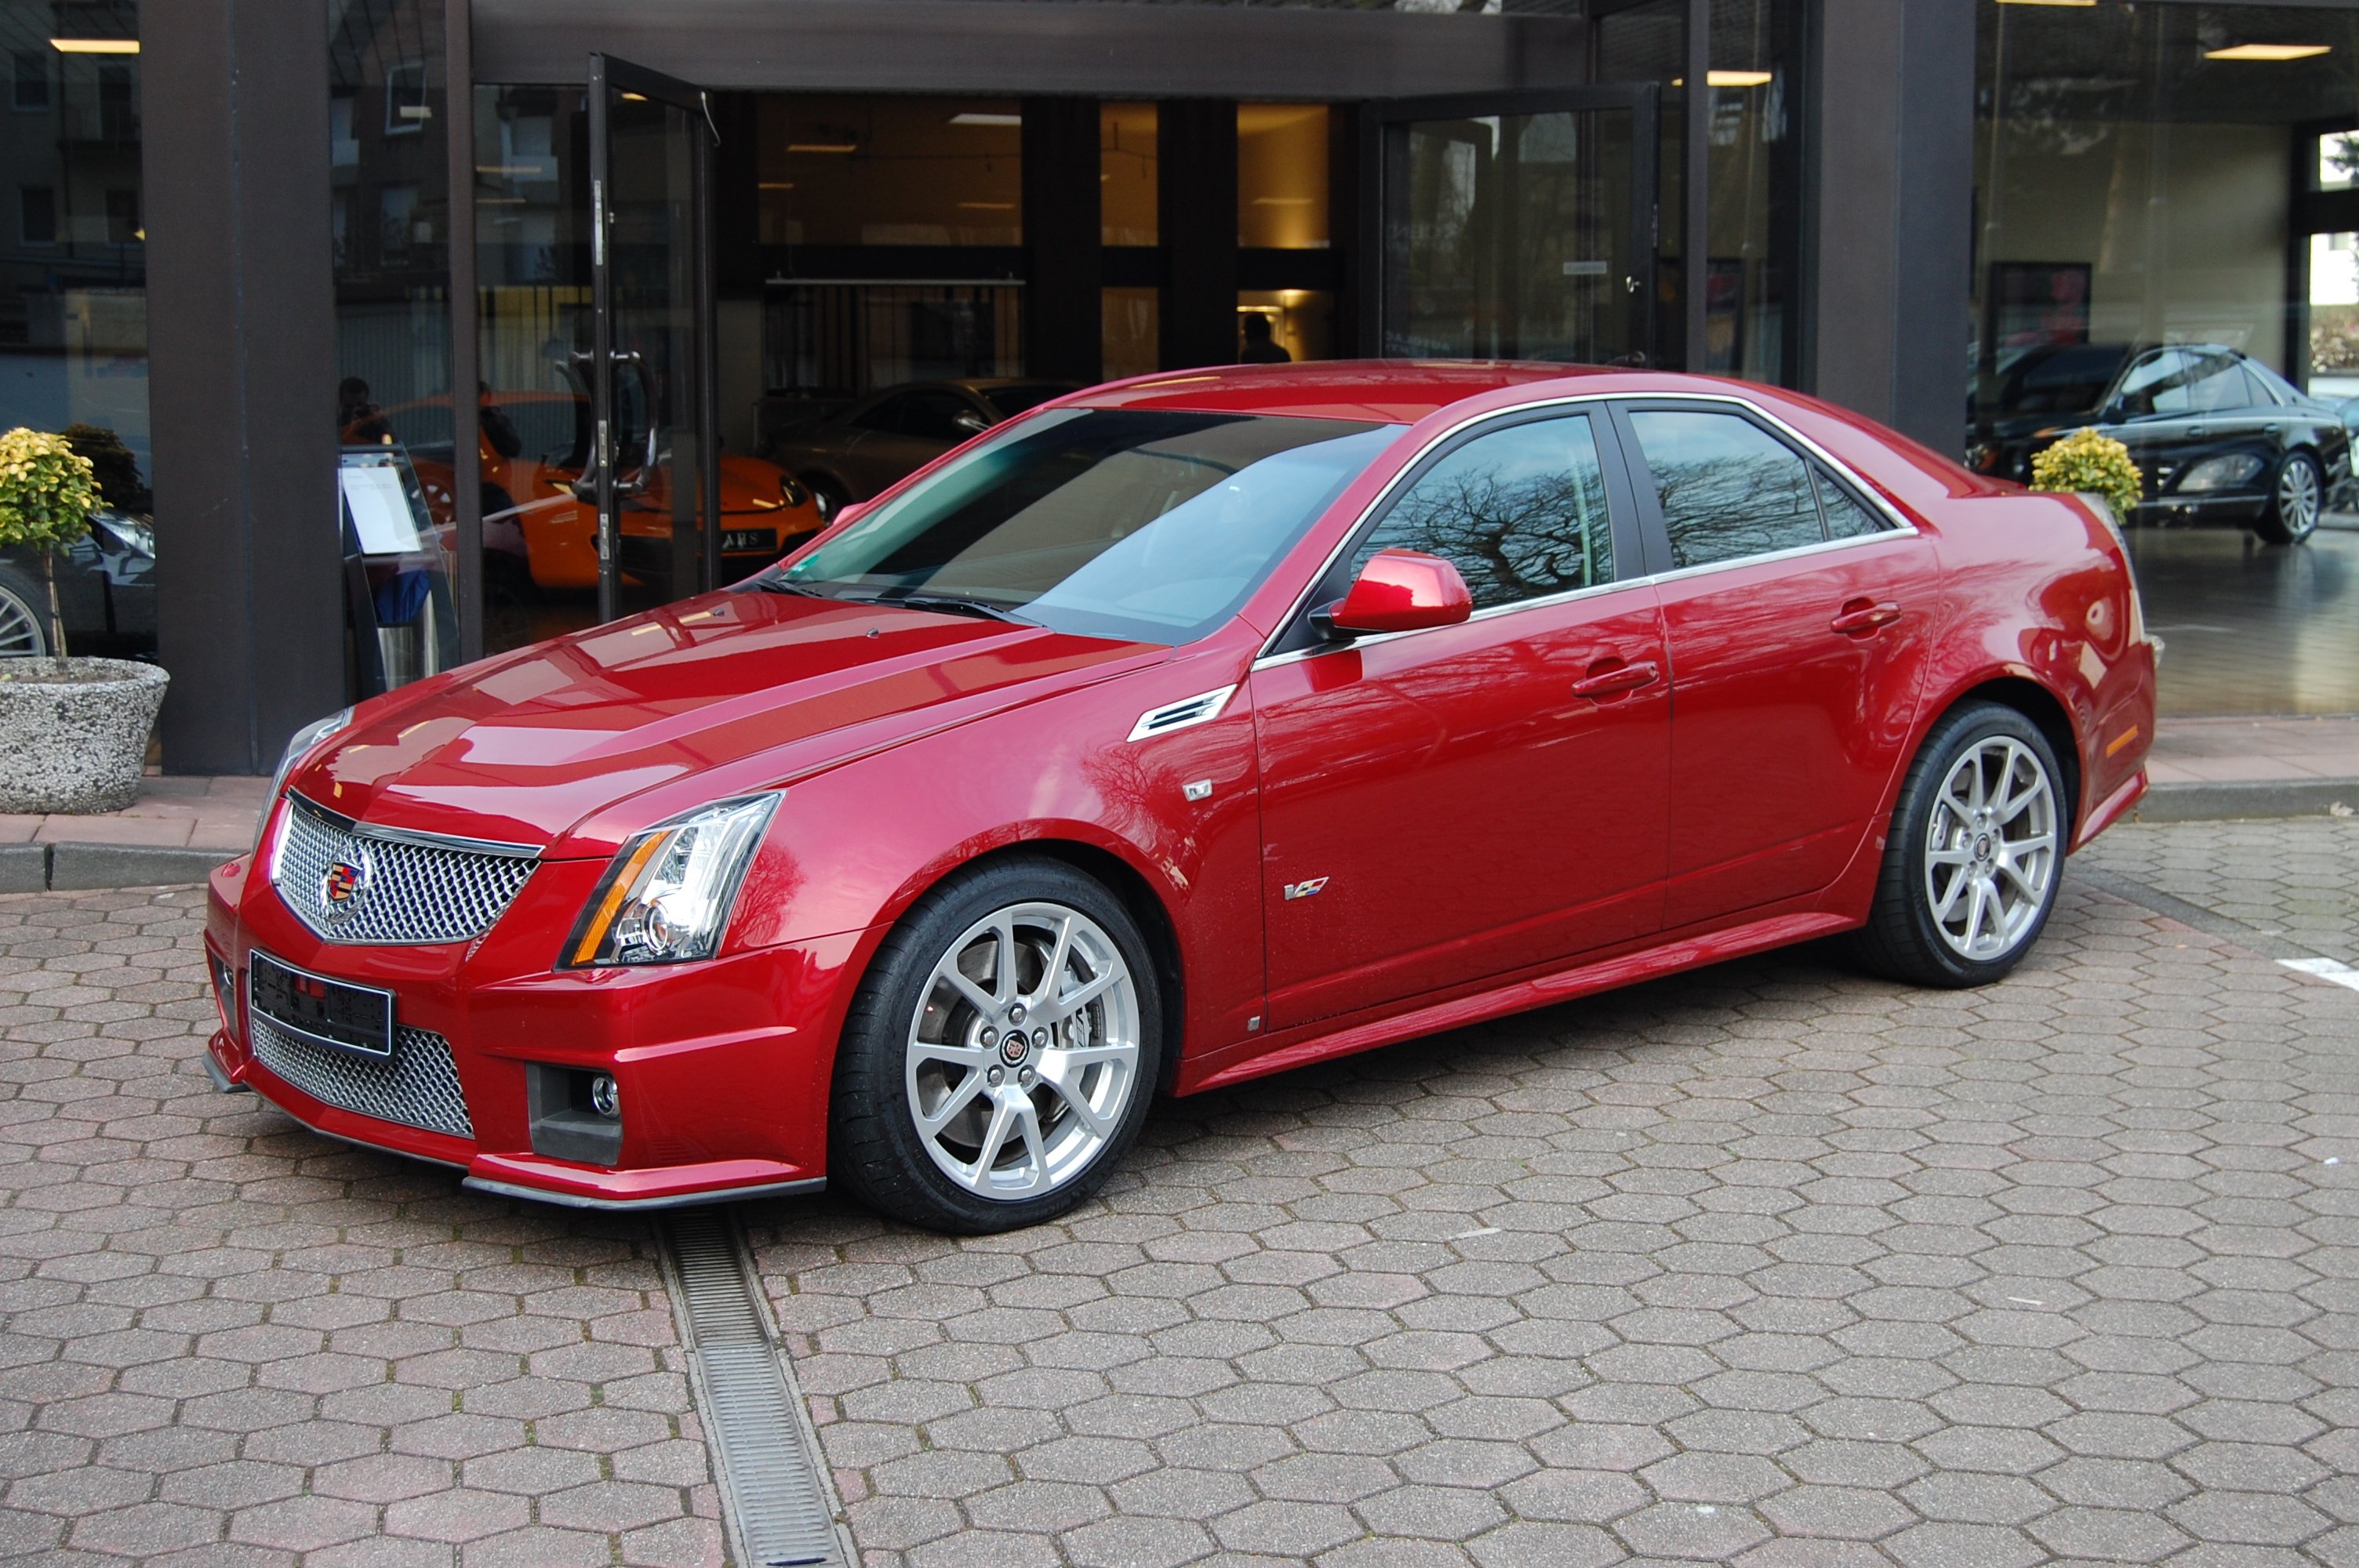 2010, Cadillac, Cts v, 6, 2, Supercharged, Europamodell, Cts, Luxury, Muscle Wallpaper